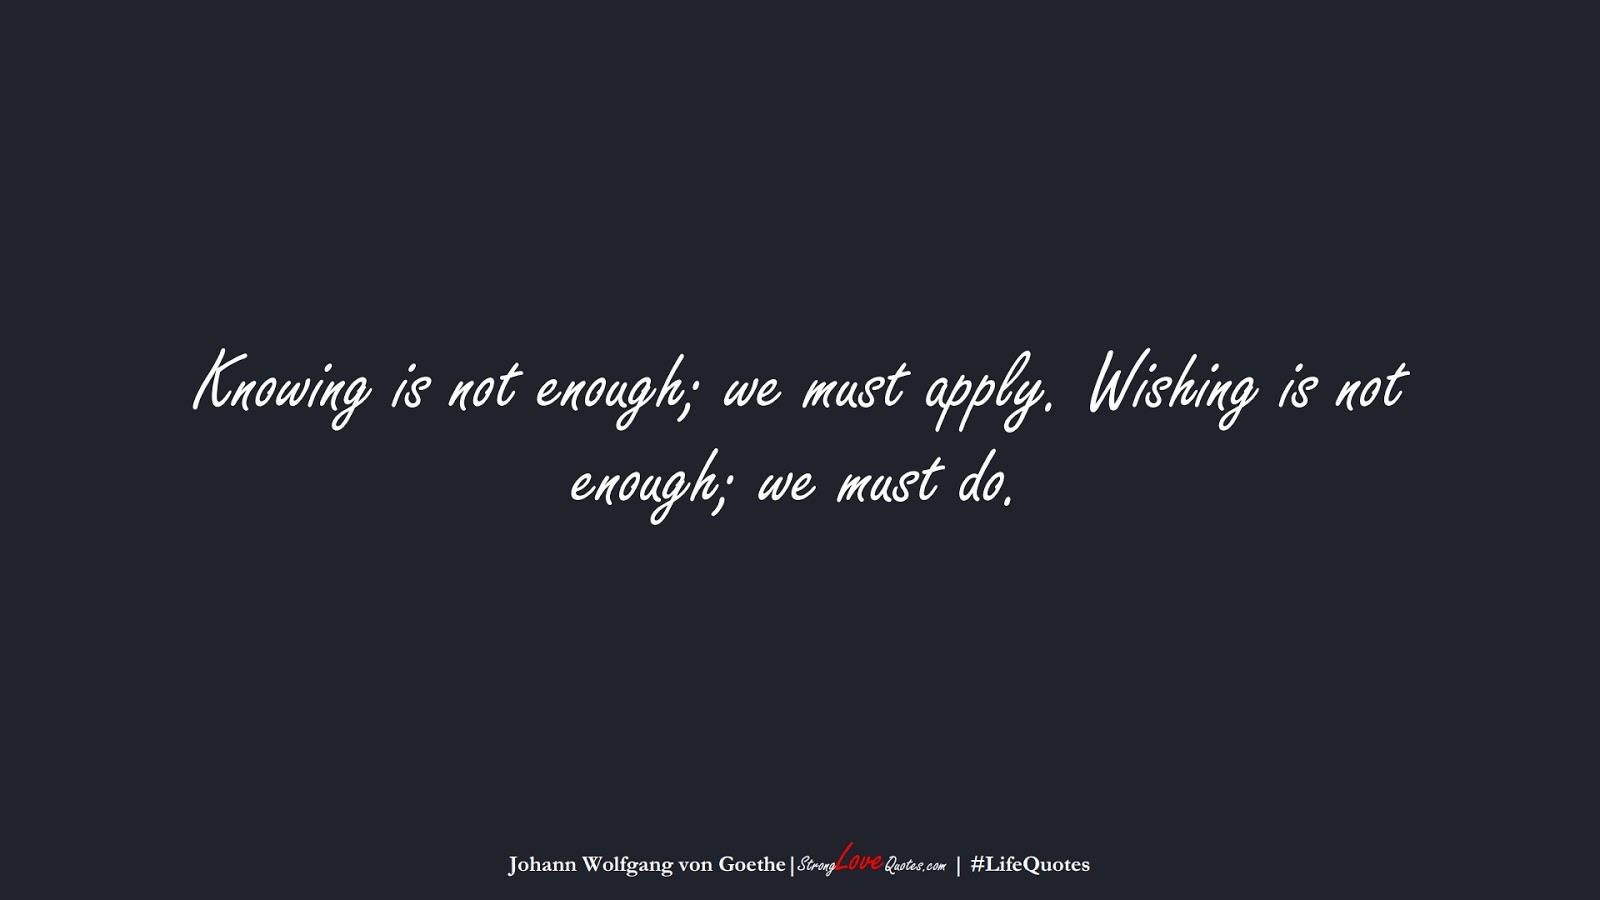 Knowing is not enough; we must apply. Wishing is not enough; we must do. (Johann Wolfgang von Goethe);  #LifeQuotes